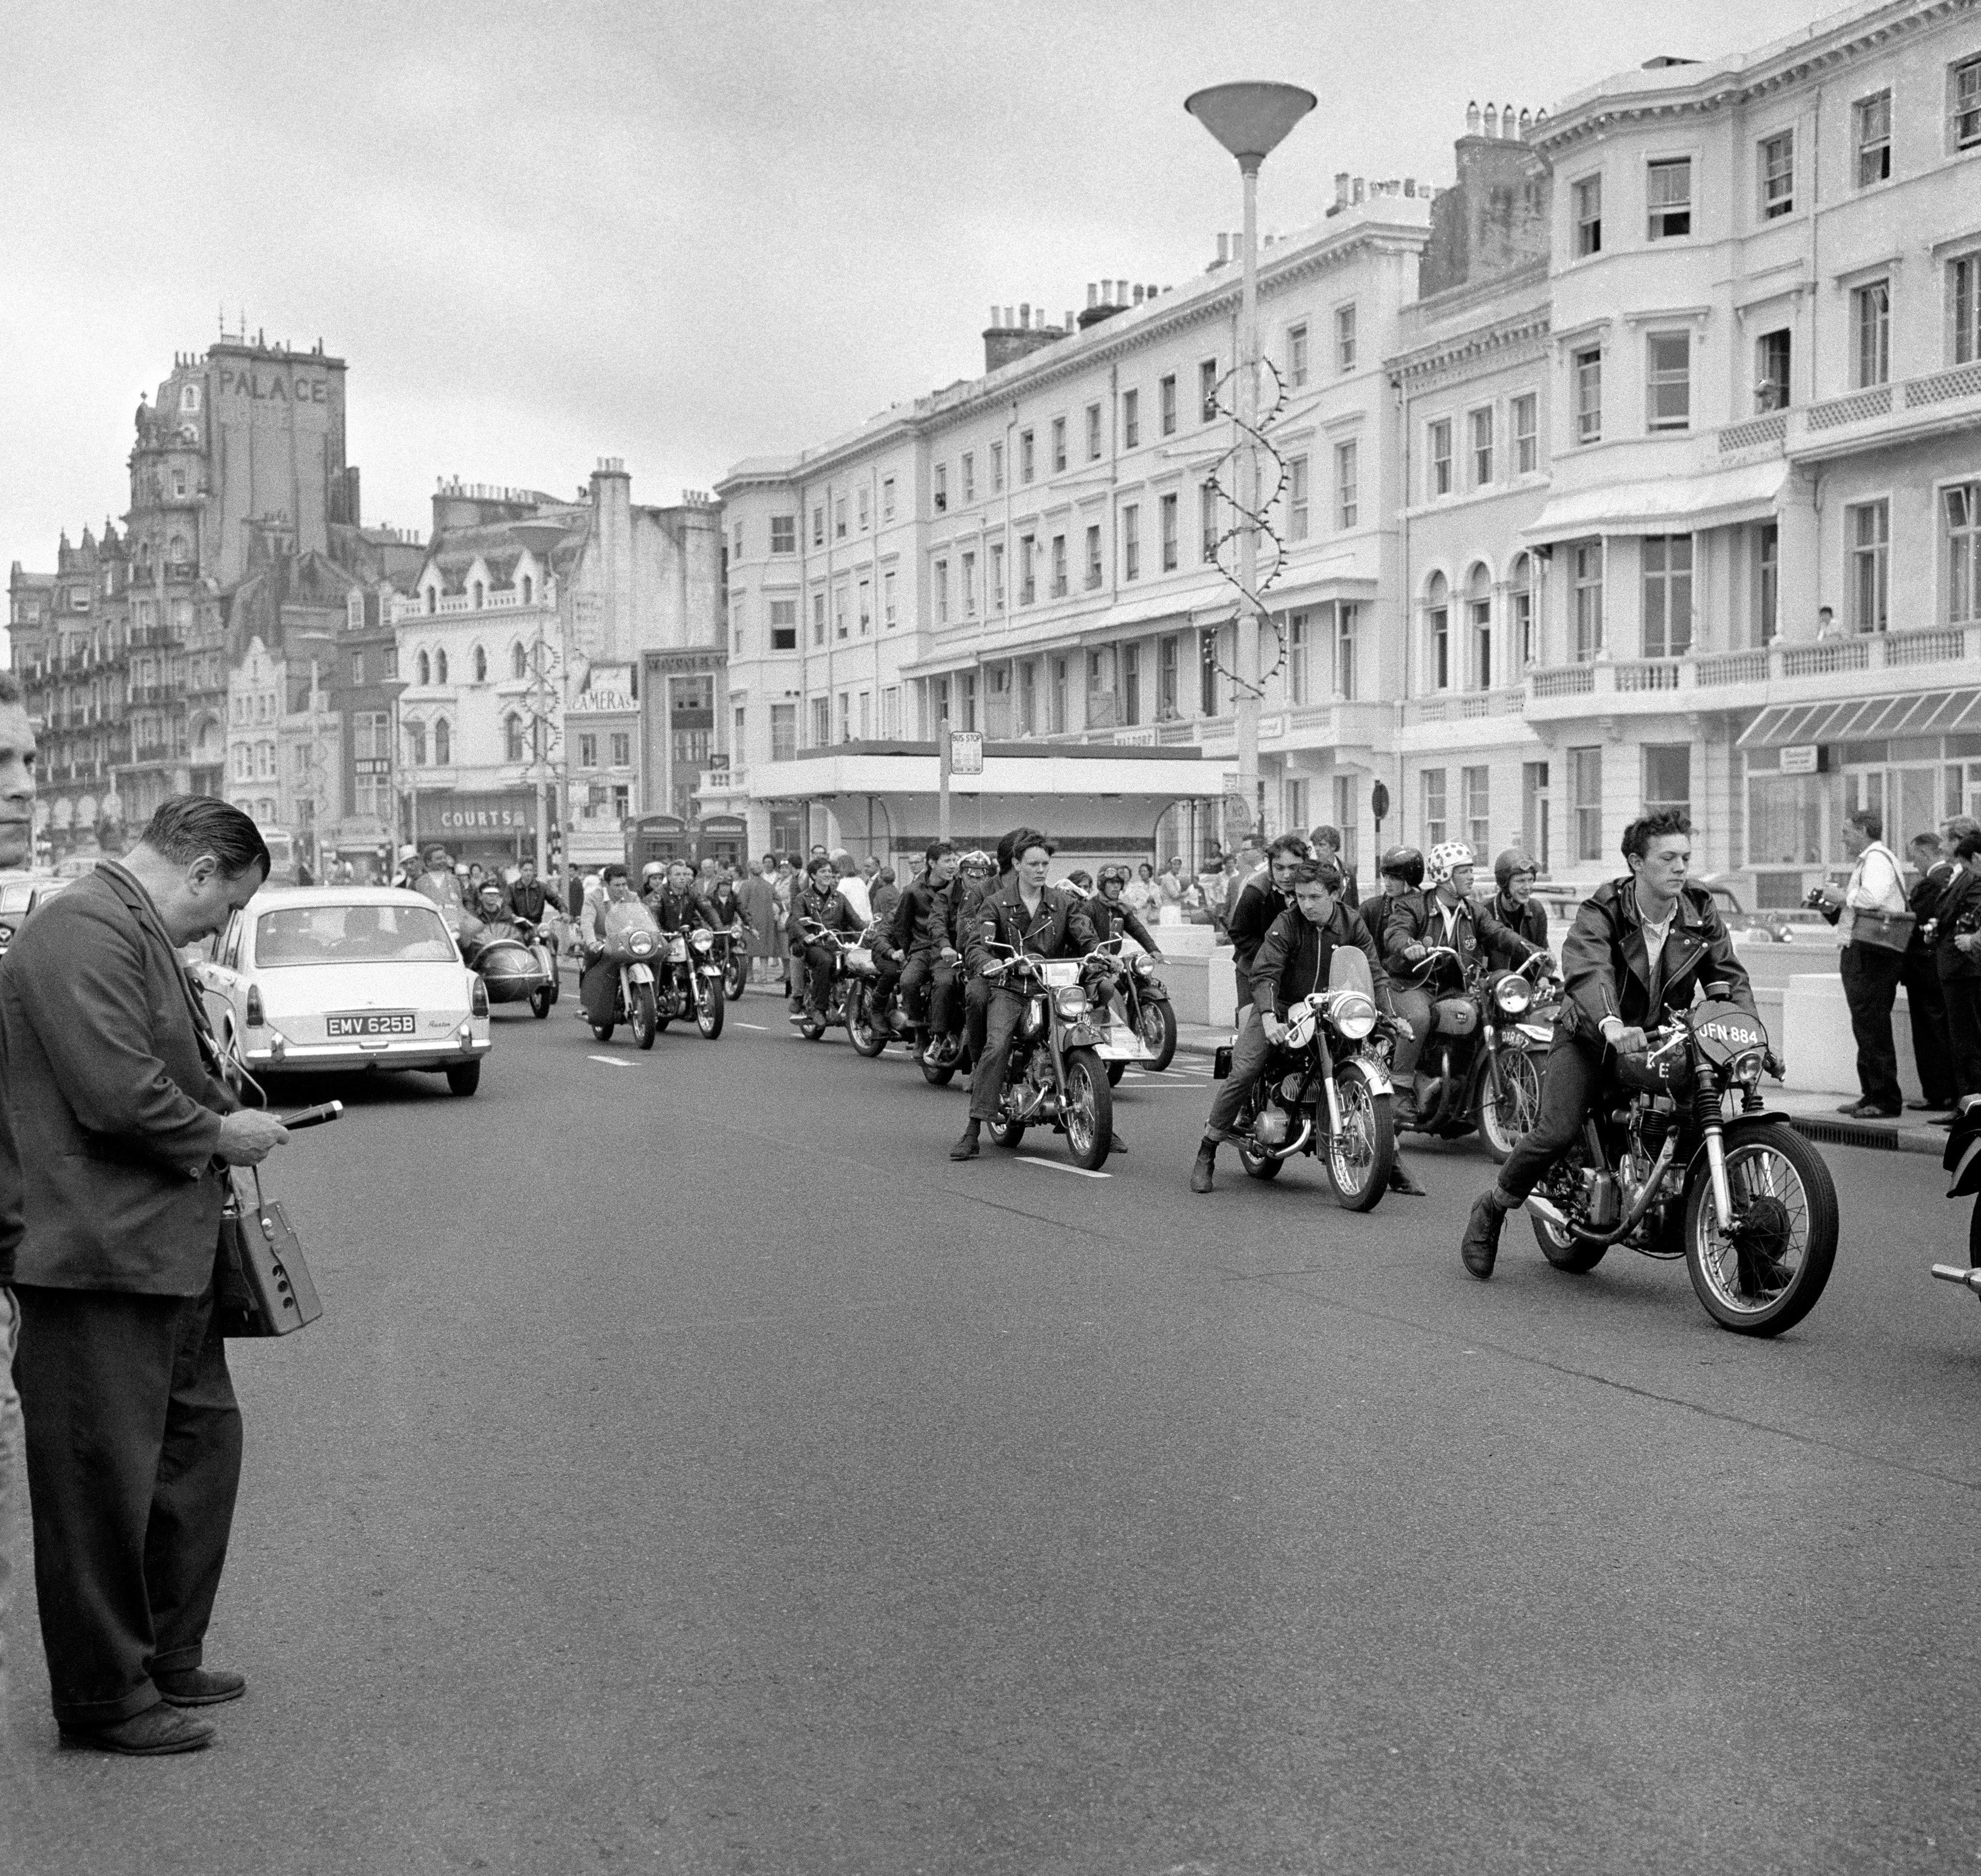 Mods Vs. Rockers: When The Youth Of The 60s UK Erupted Into Violence